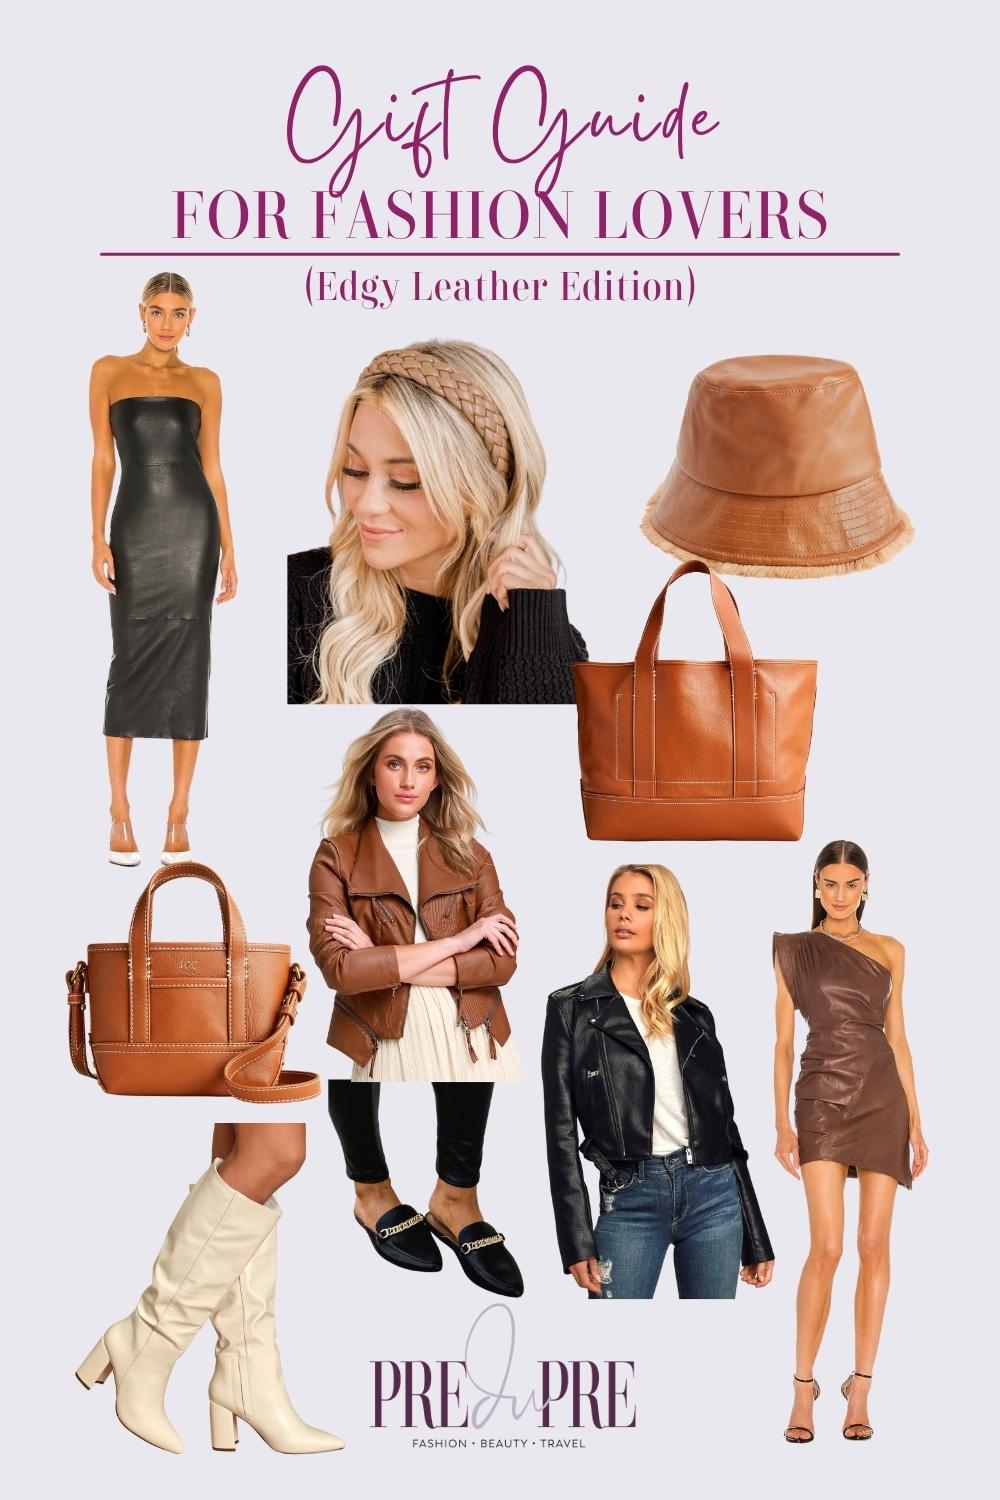 fashion gift guide for faux leather lovers includes bags, jackets, hats, and dresses